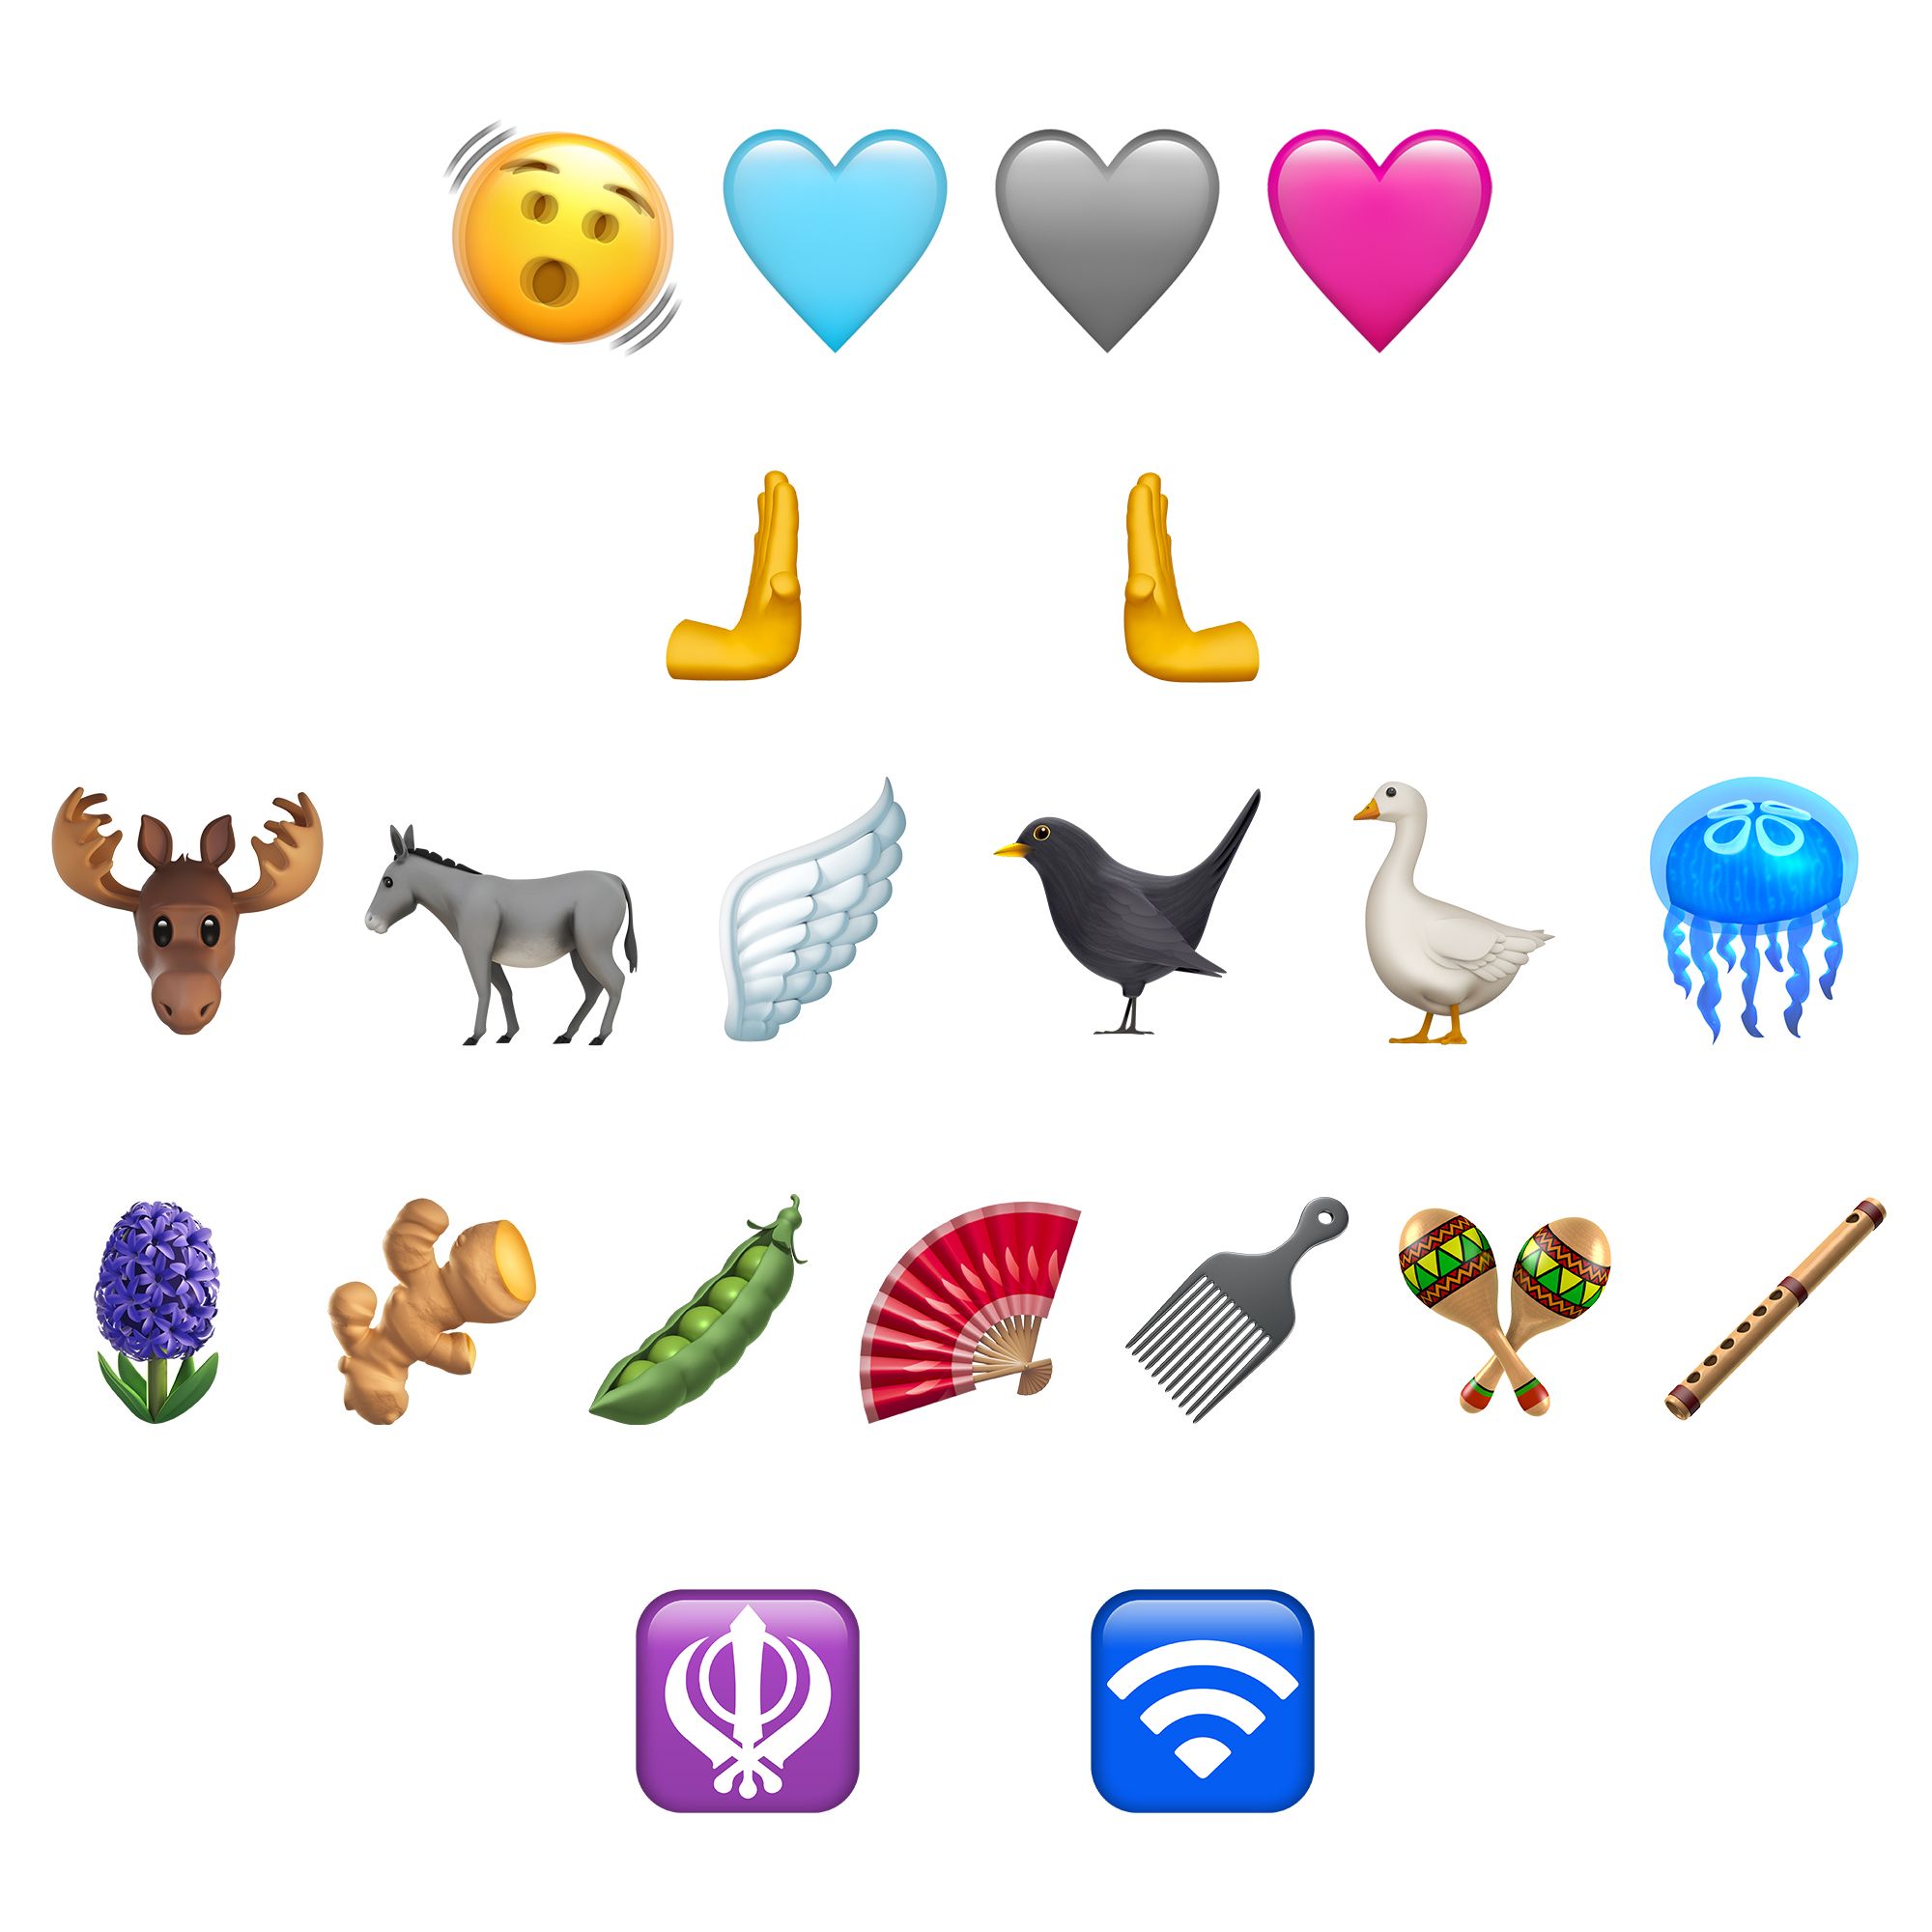 First Look: New Emojis in iOS 